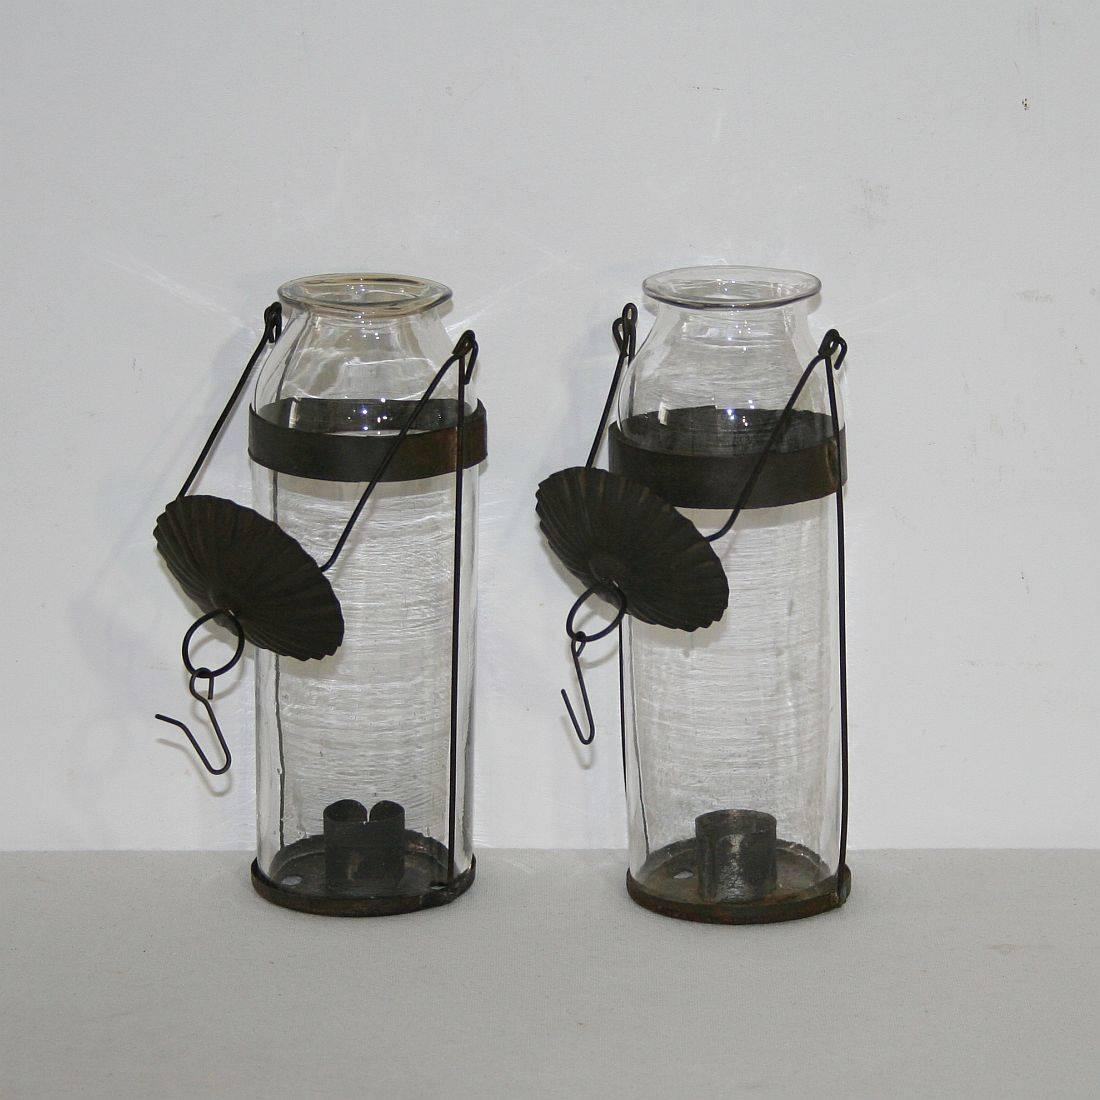 Hand-Crafted Couple of 19th Century French Glass Lanterns